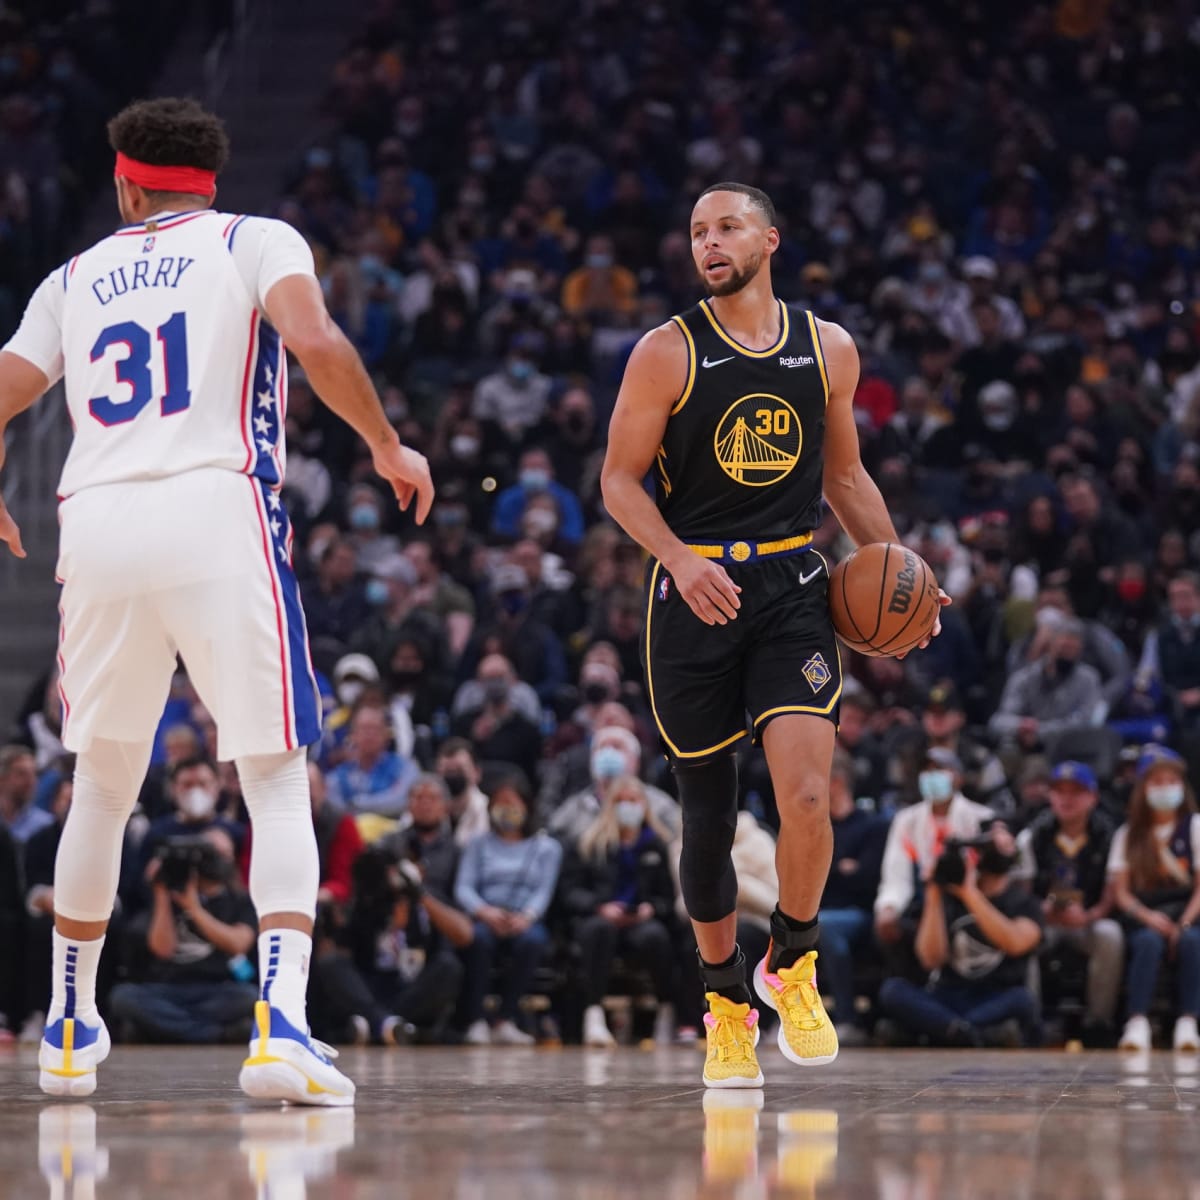 NBA Buzz - Brothers Stephen Curry & Seth Curry are two of